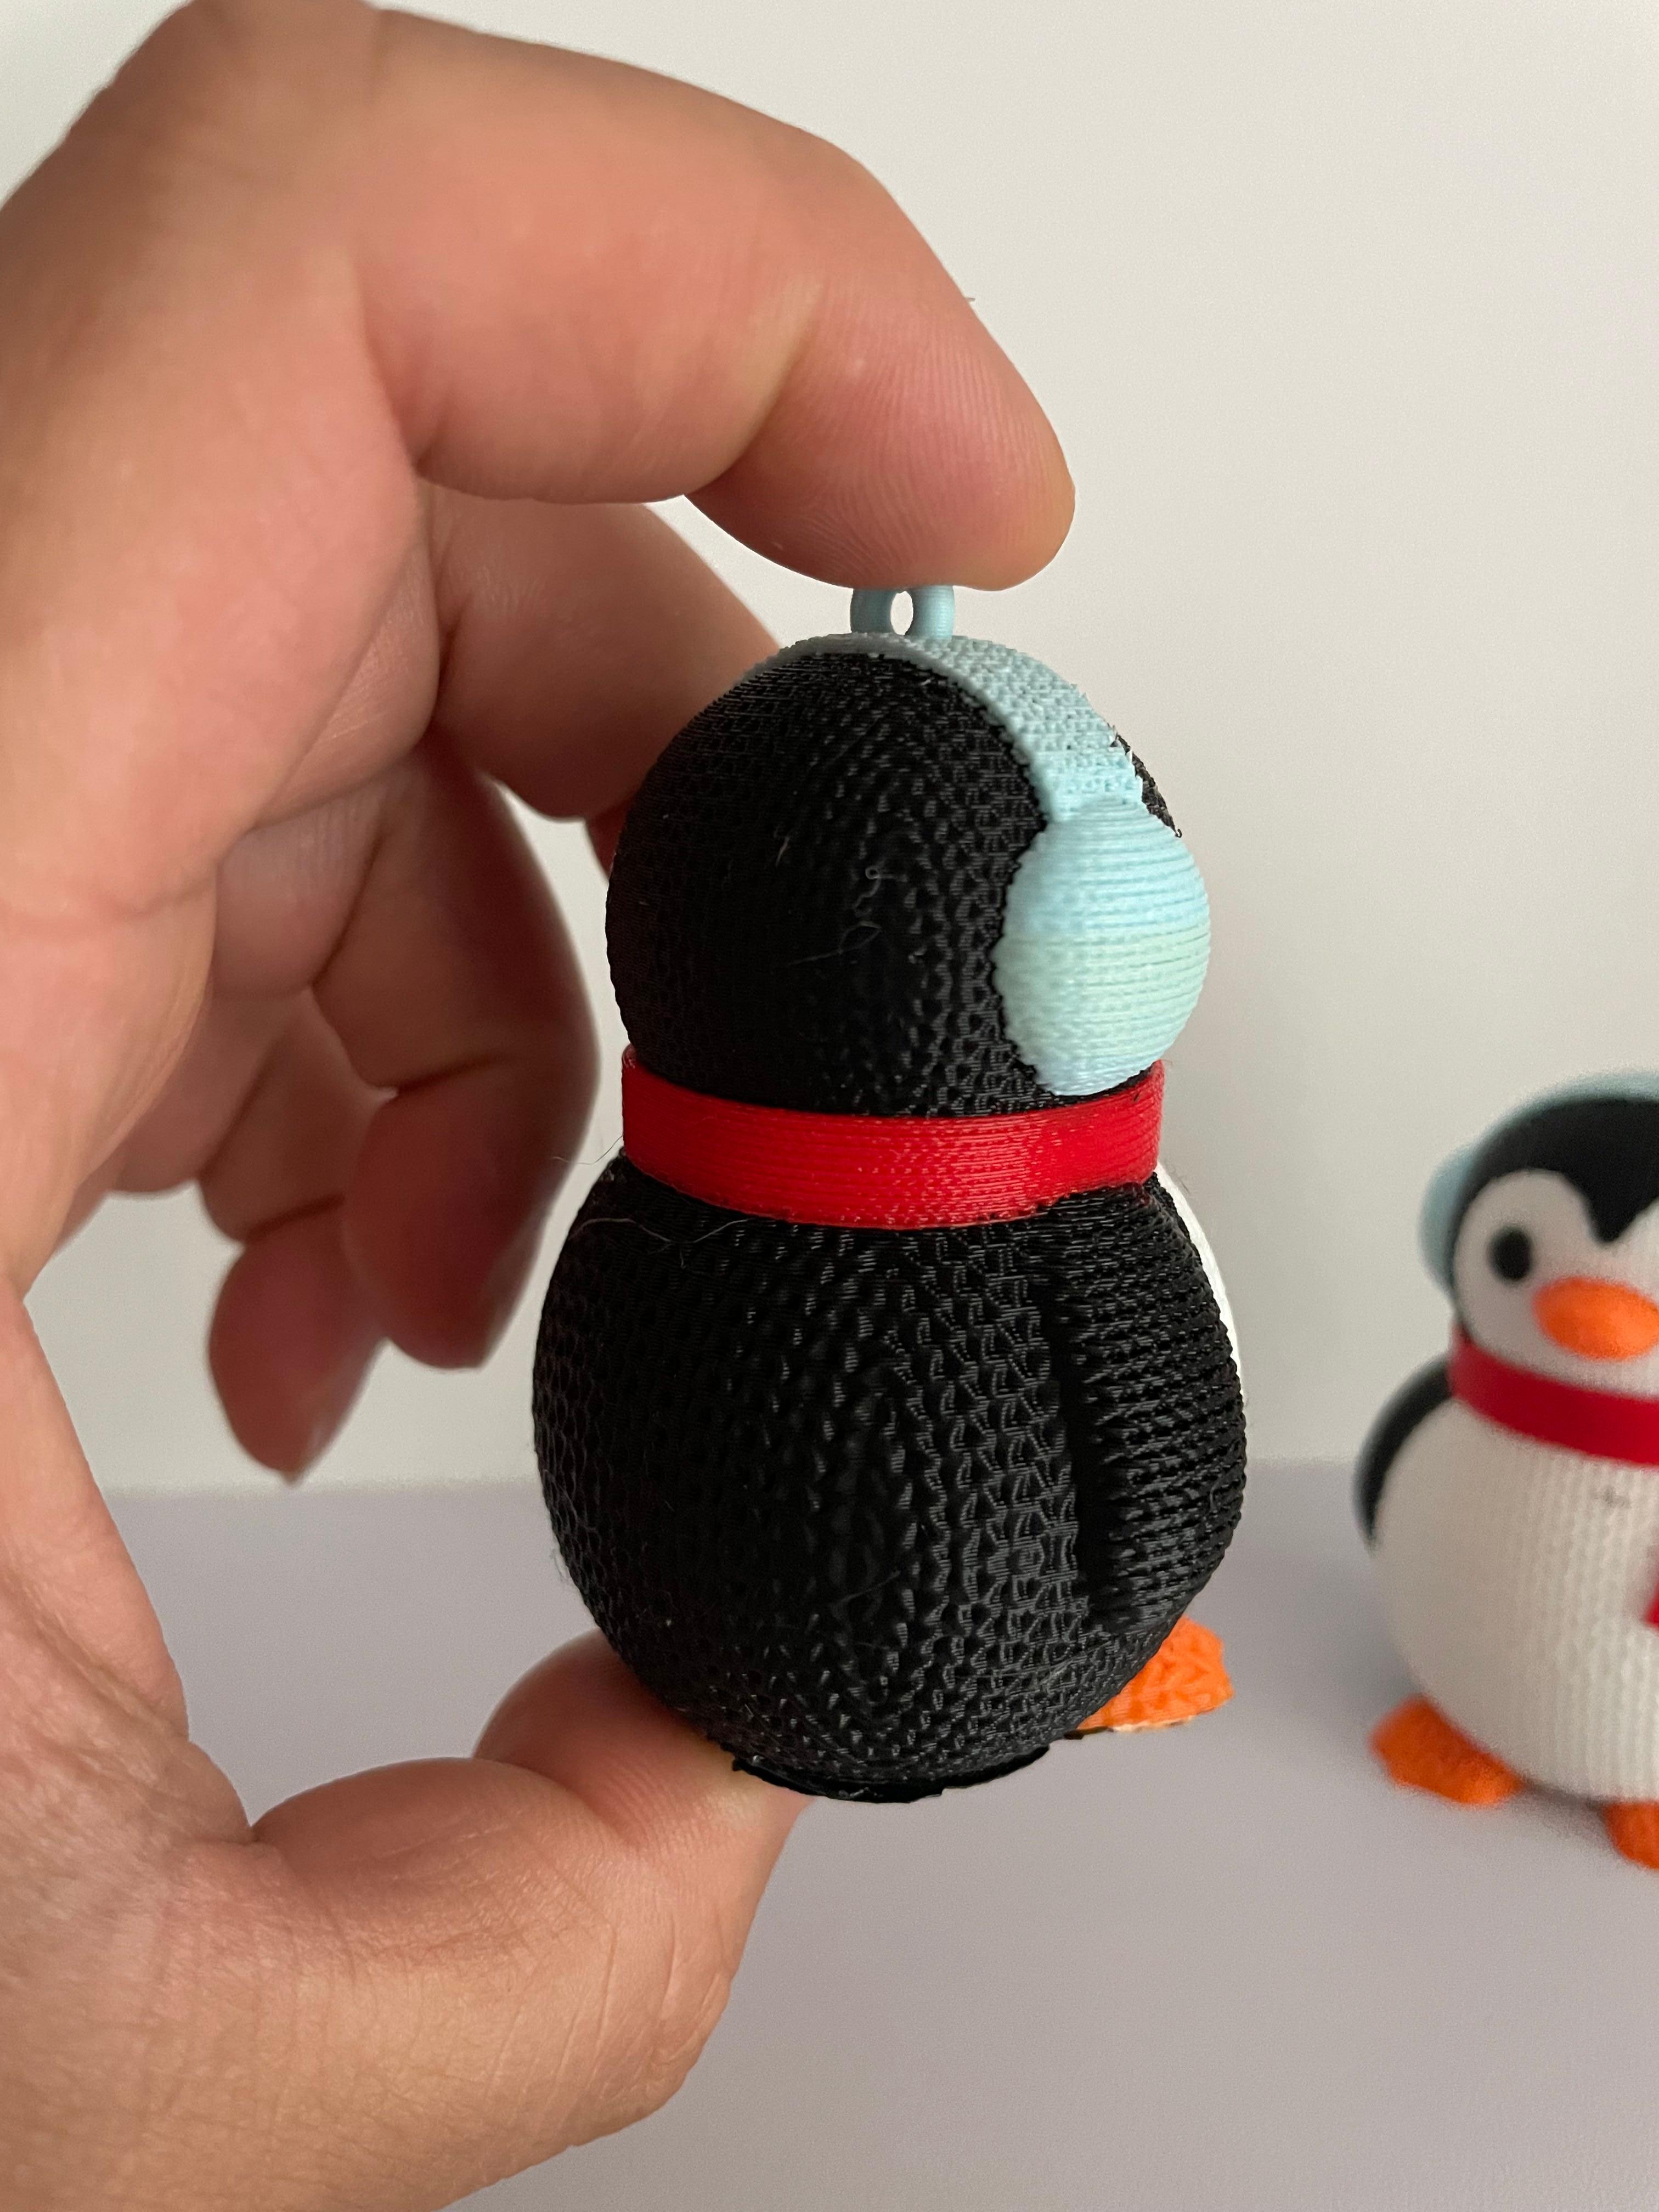 Knitted Penguin Figurine and Ornament / No Supports / 3MF Included 3d model